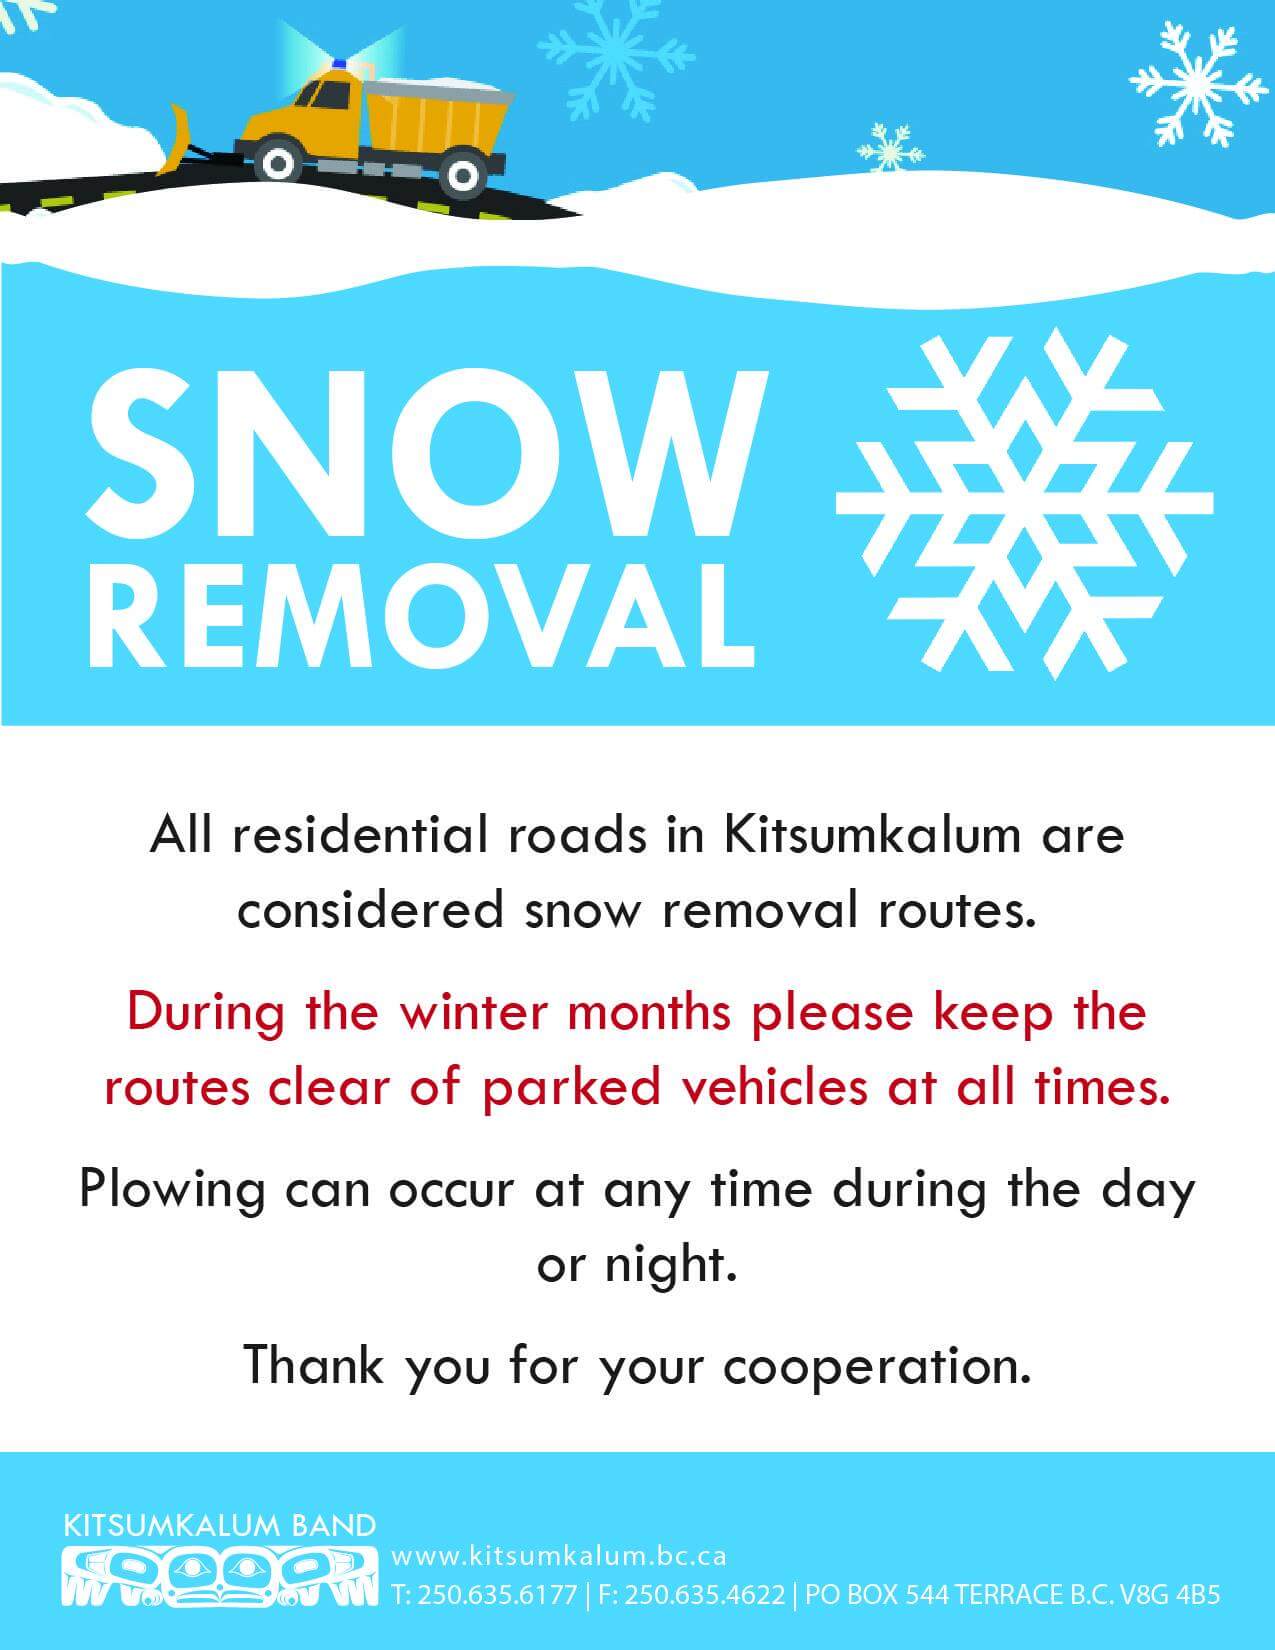 Please do not park on residential roads to allow for snow removal